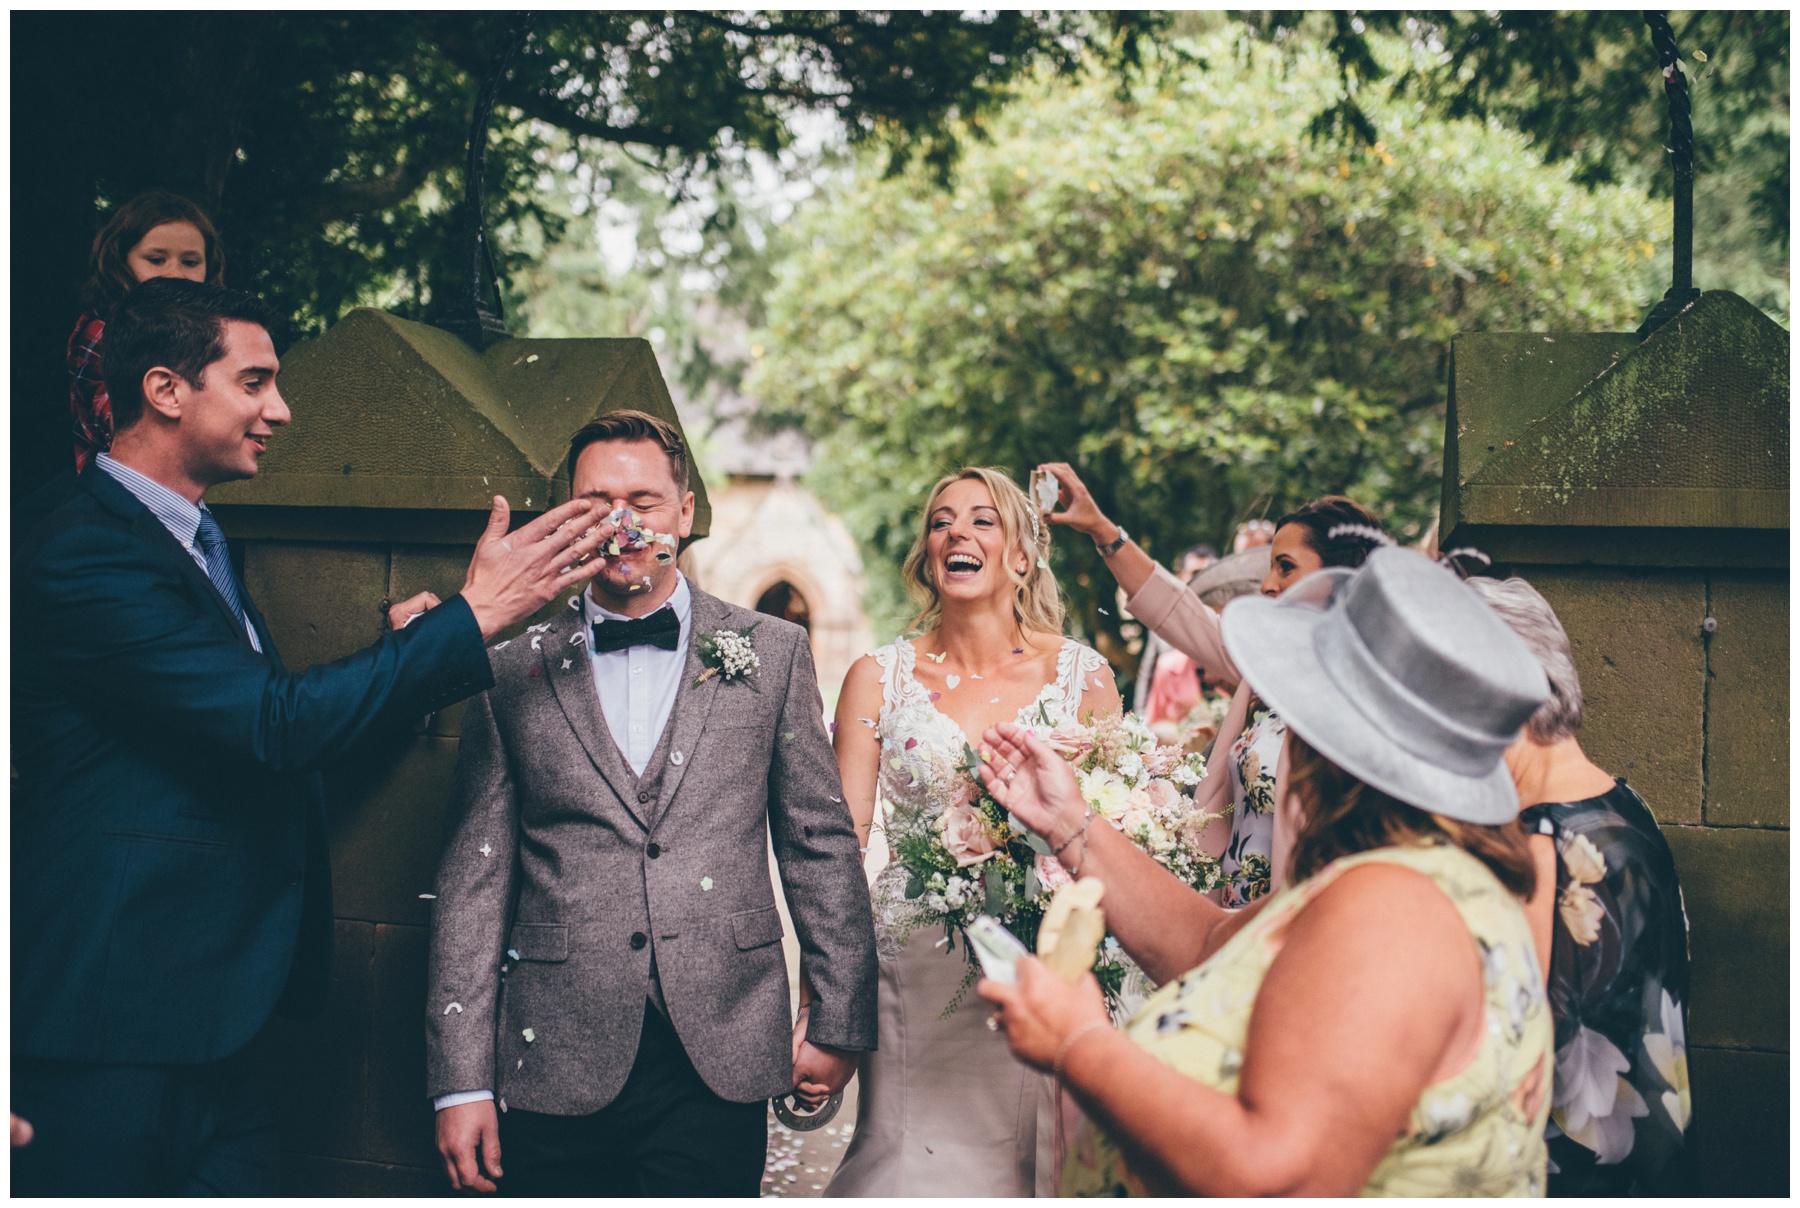 From gets confetti thrown in his face by one of the wedding guests at Staffordshire tipi wedding.